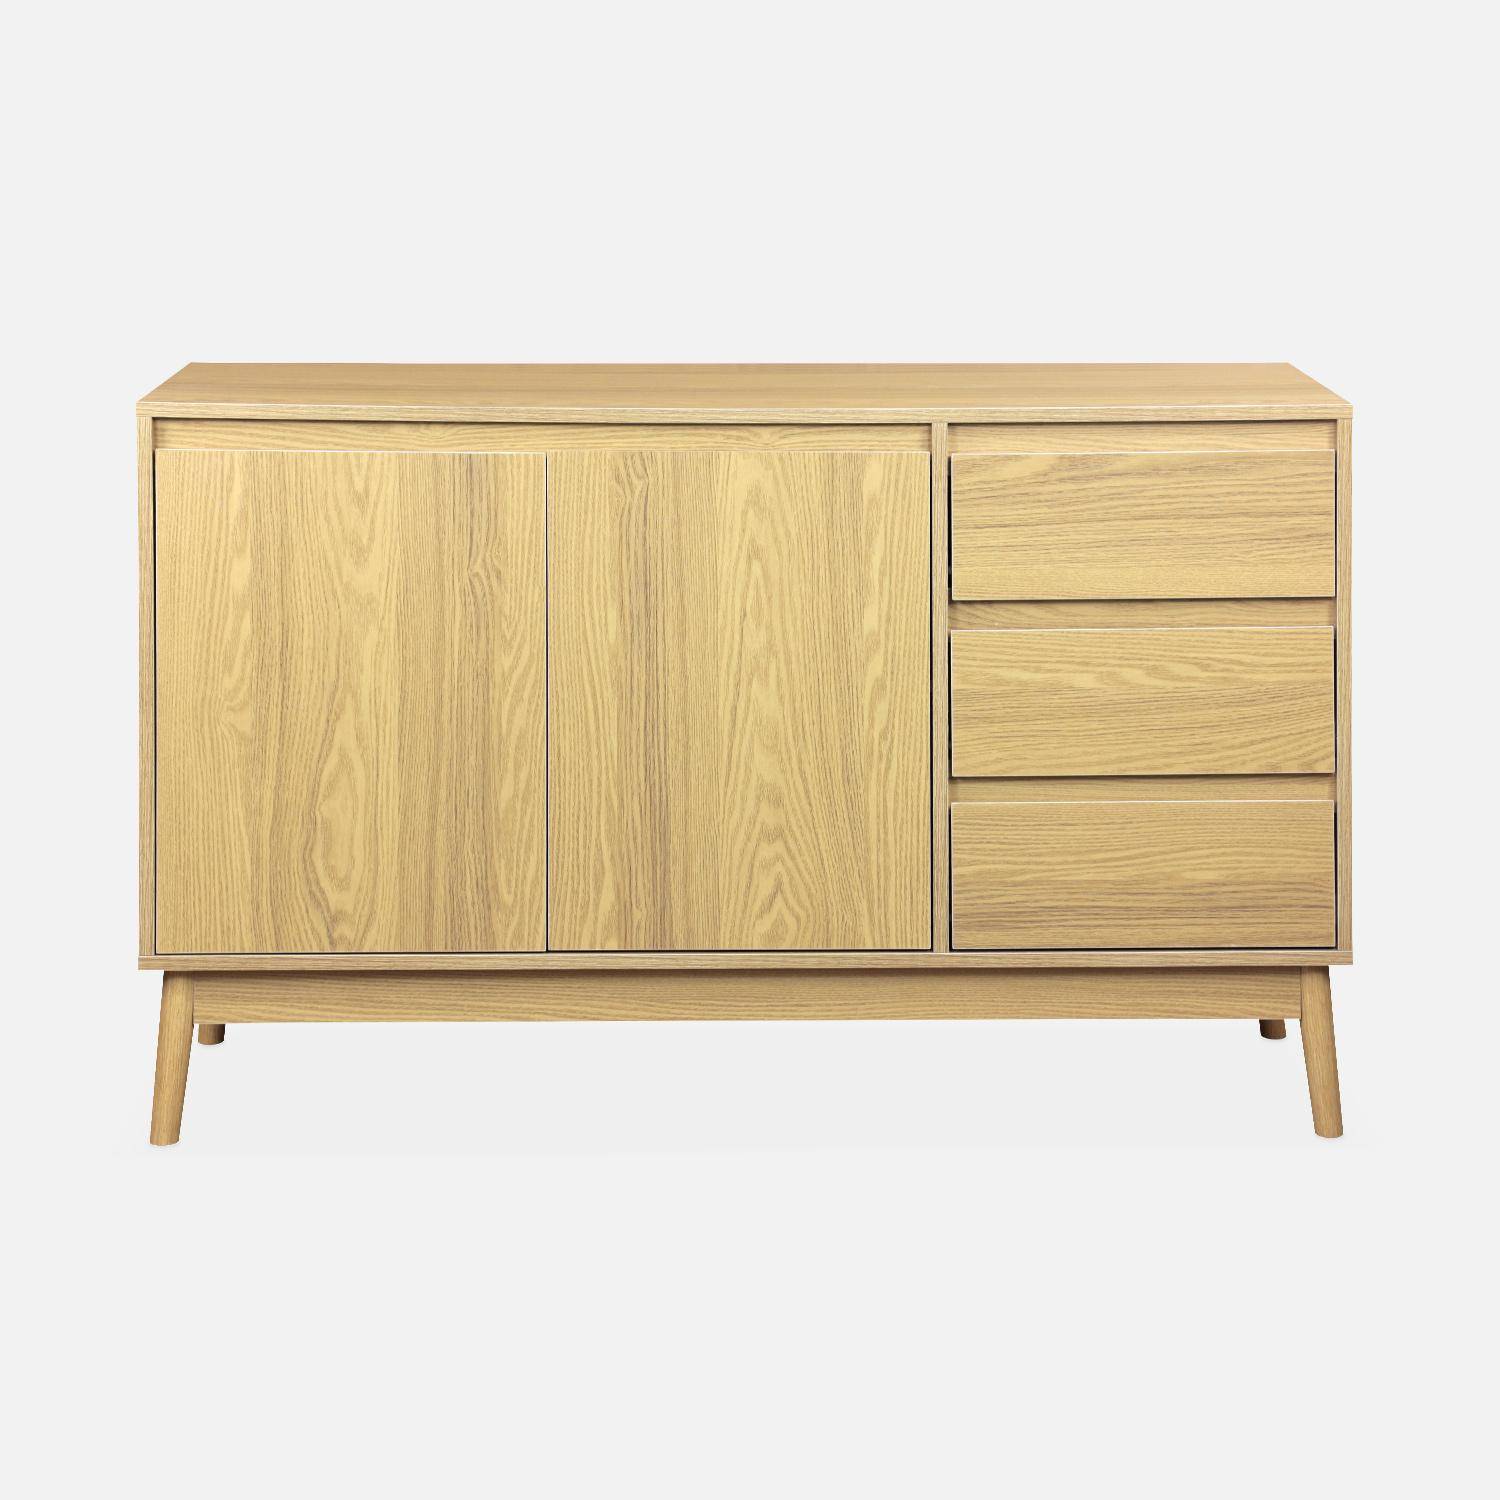 Wooden sideboard with 2 doors and 3 drawers L 120 x W 39 H 76cm - Dune Photo4